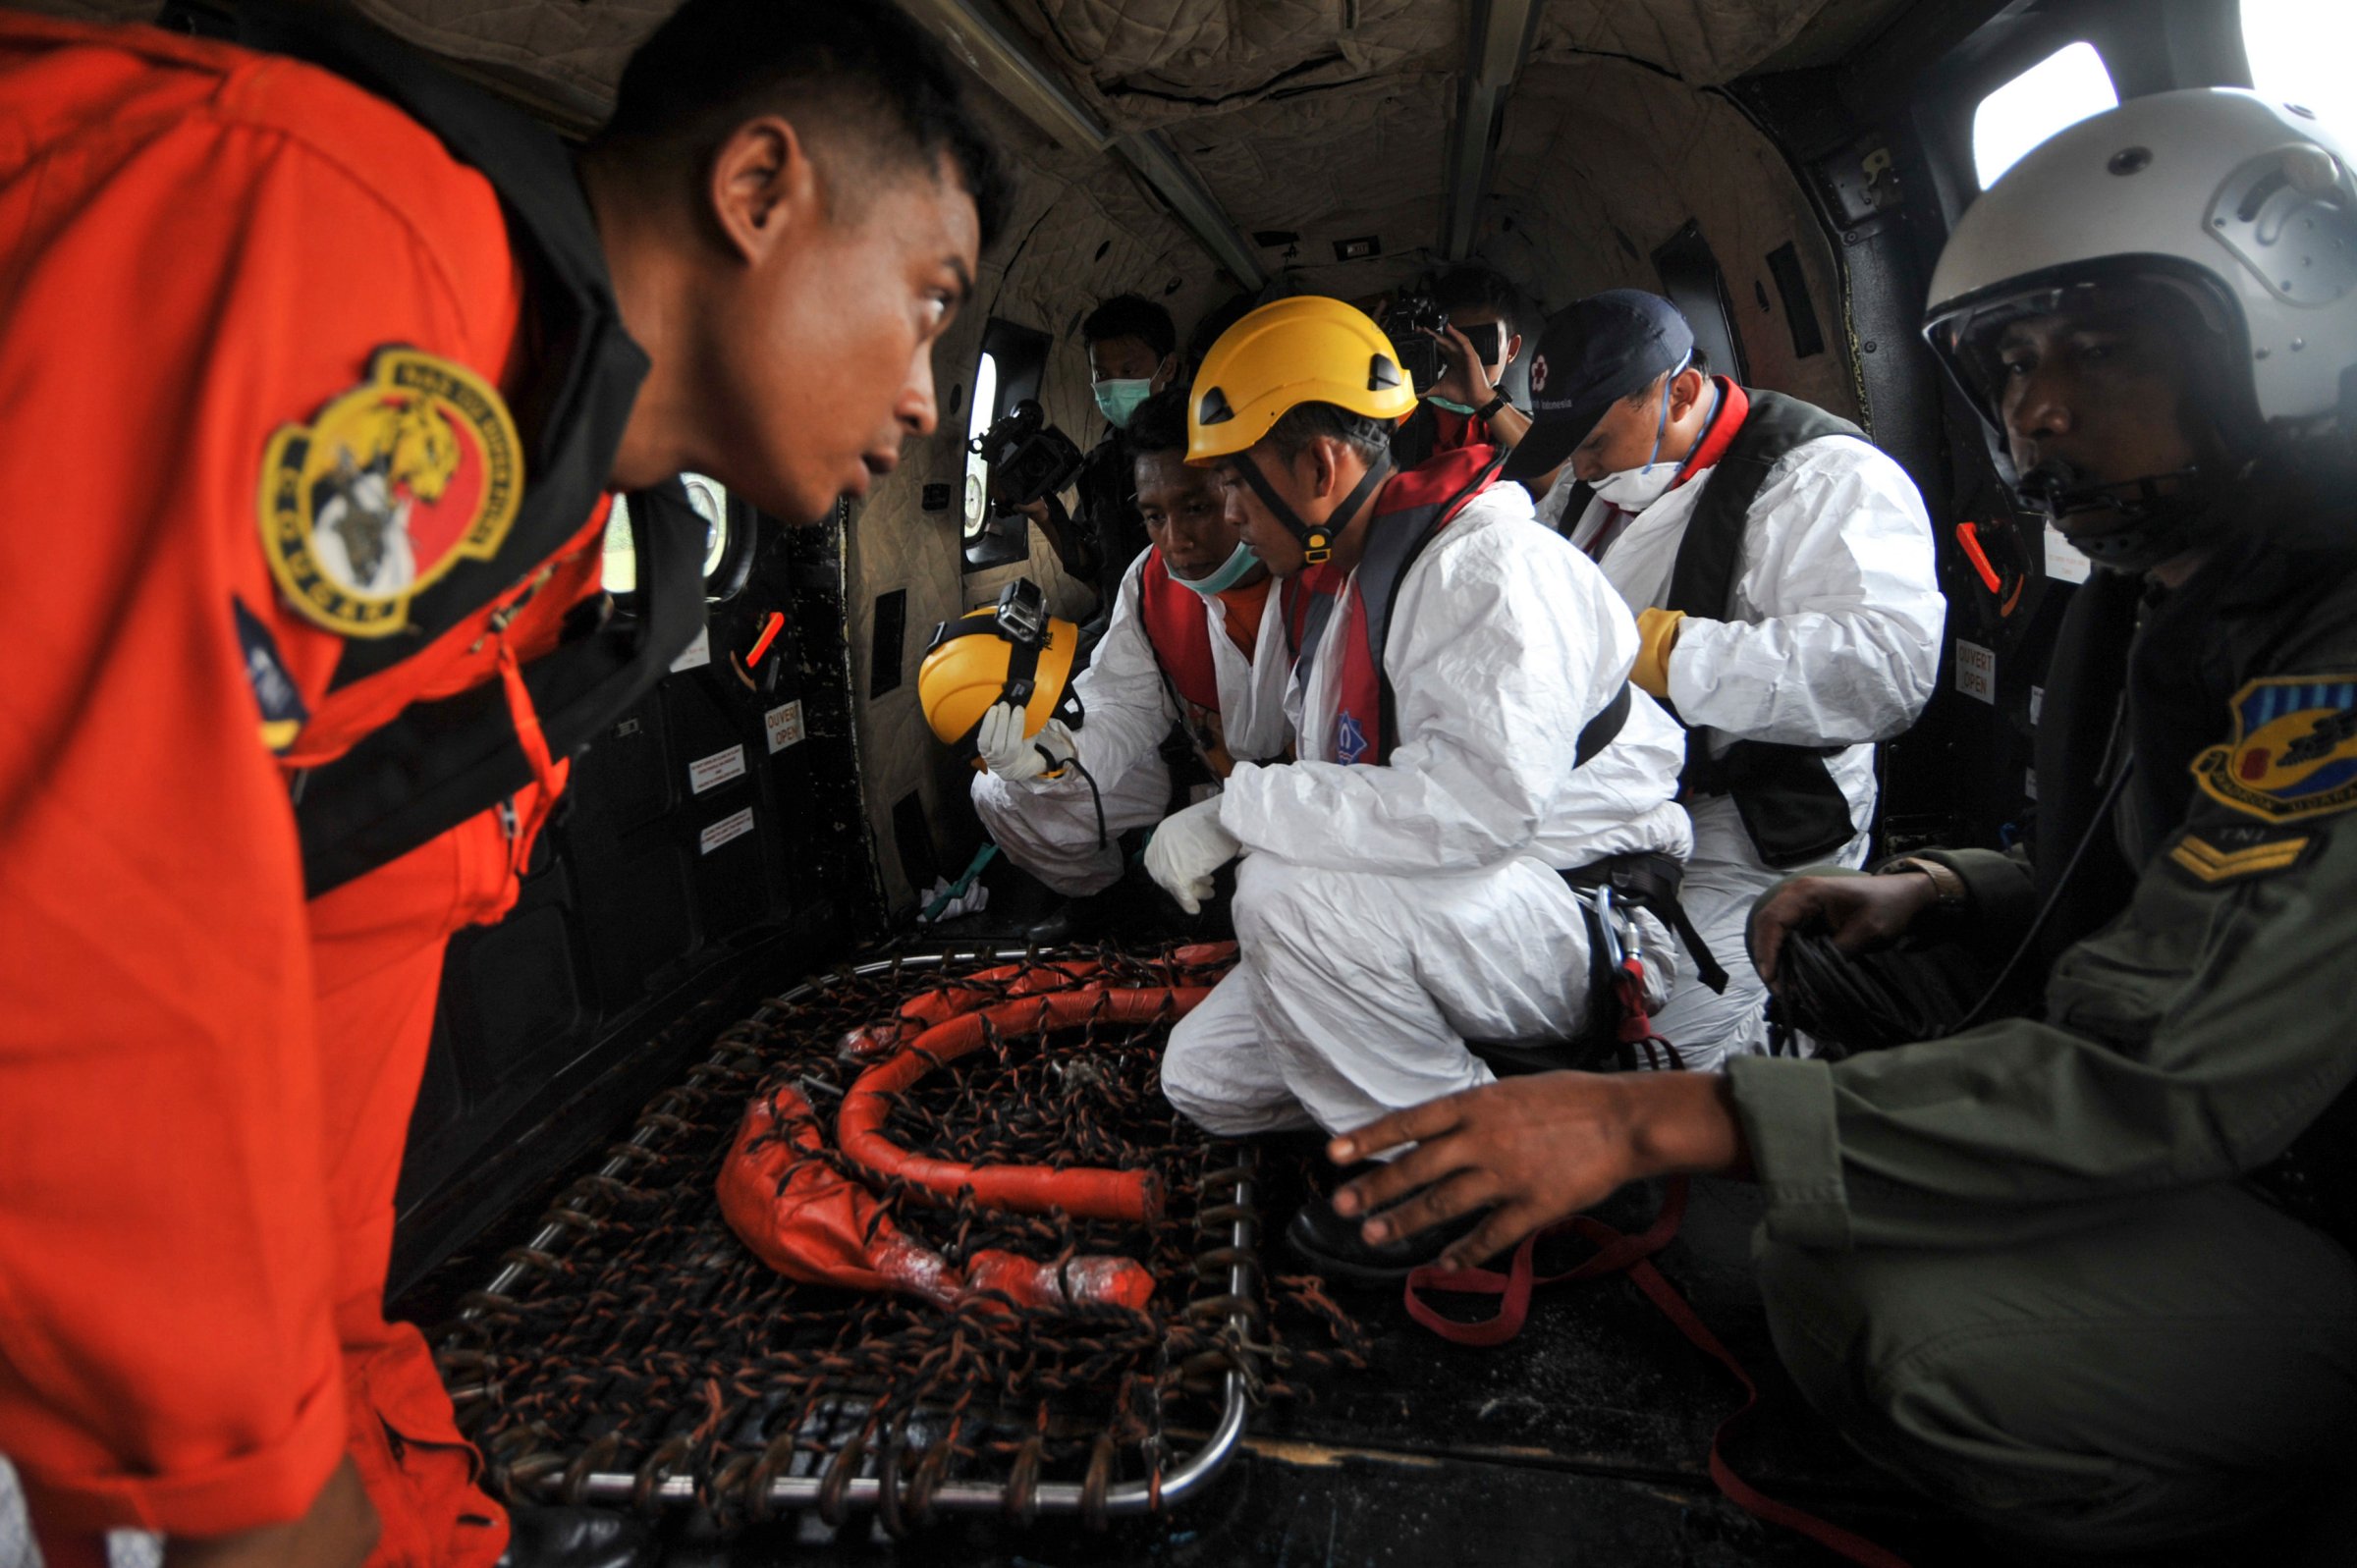 Search and rescue teams and flight crew prepare their gear on board an Indonesian Air Force Super Puma helicopter before a search mission for debris and bodies from AirAsia flight QZ8501at Iskandar Air Force Base, in Pangkalan Bun